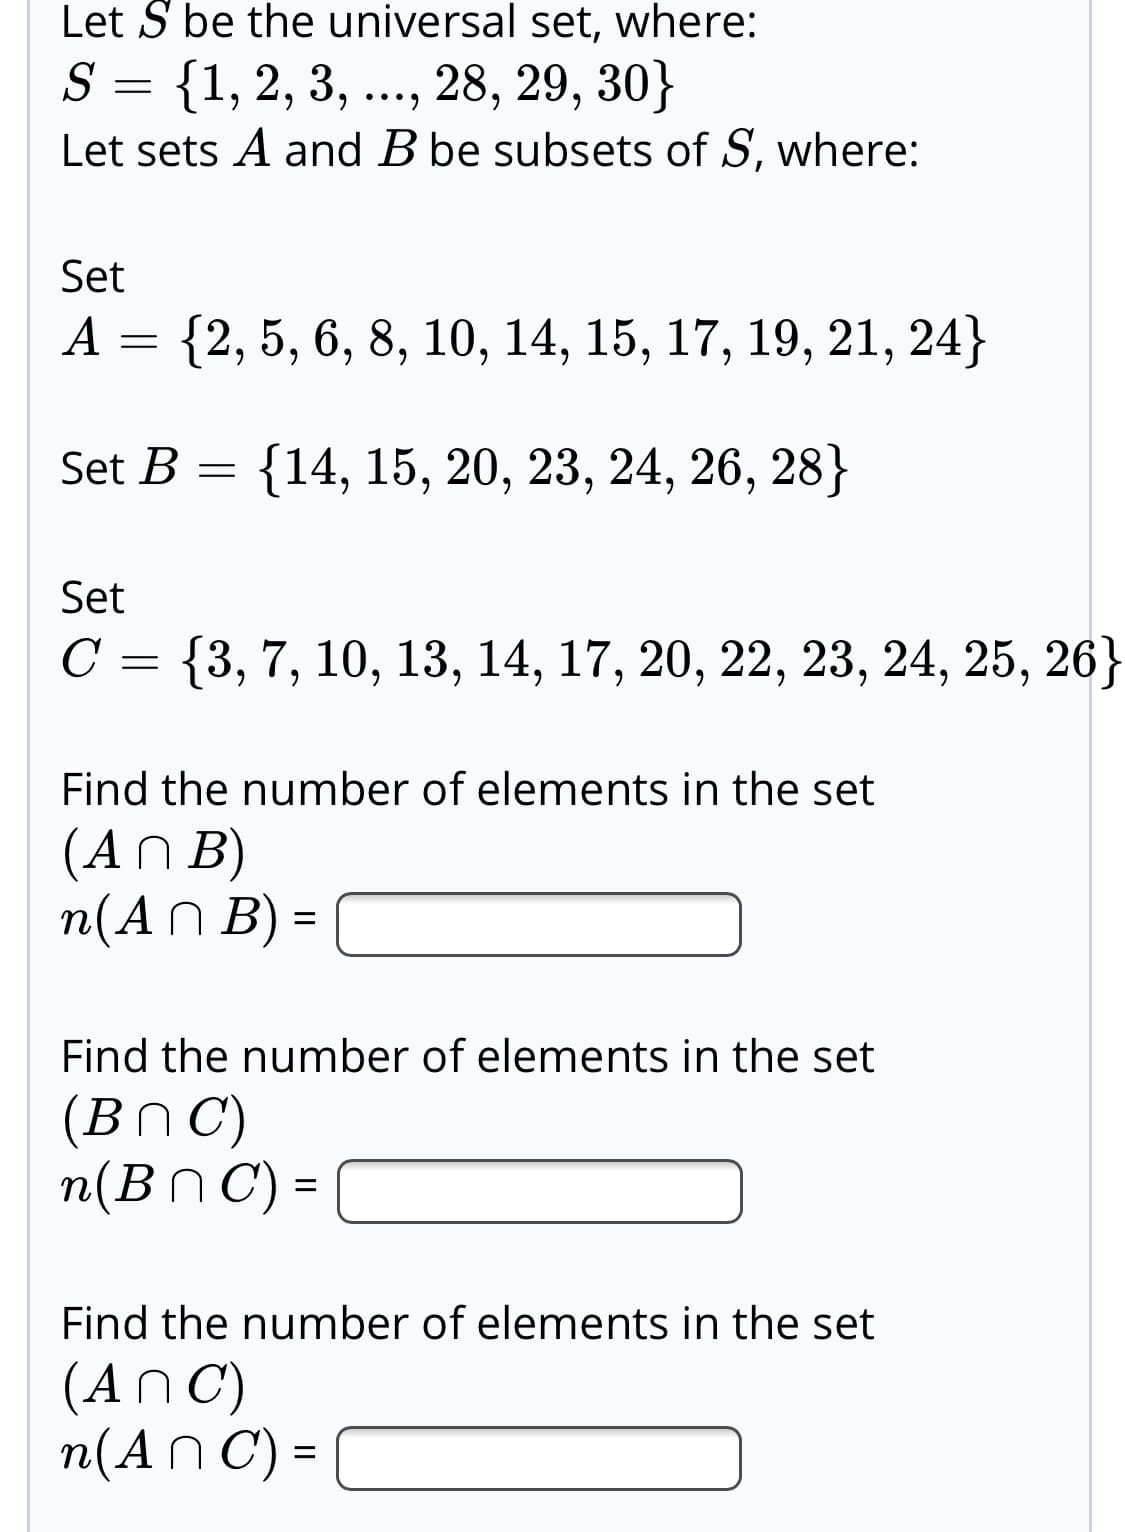 n(A N B) =
Find the number of elements in the set
(BN C)
η (B h C) -
